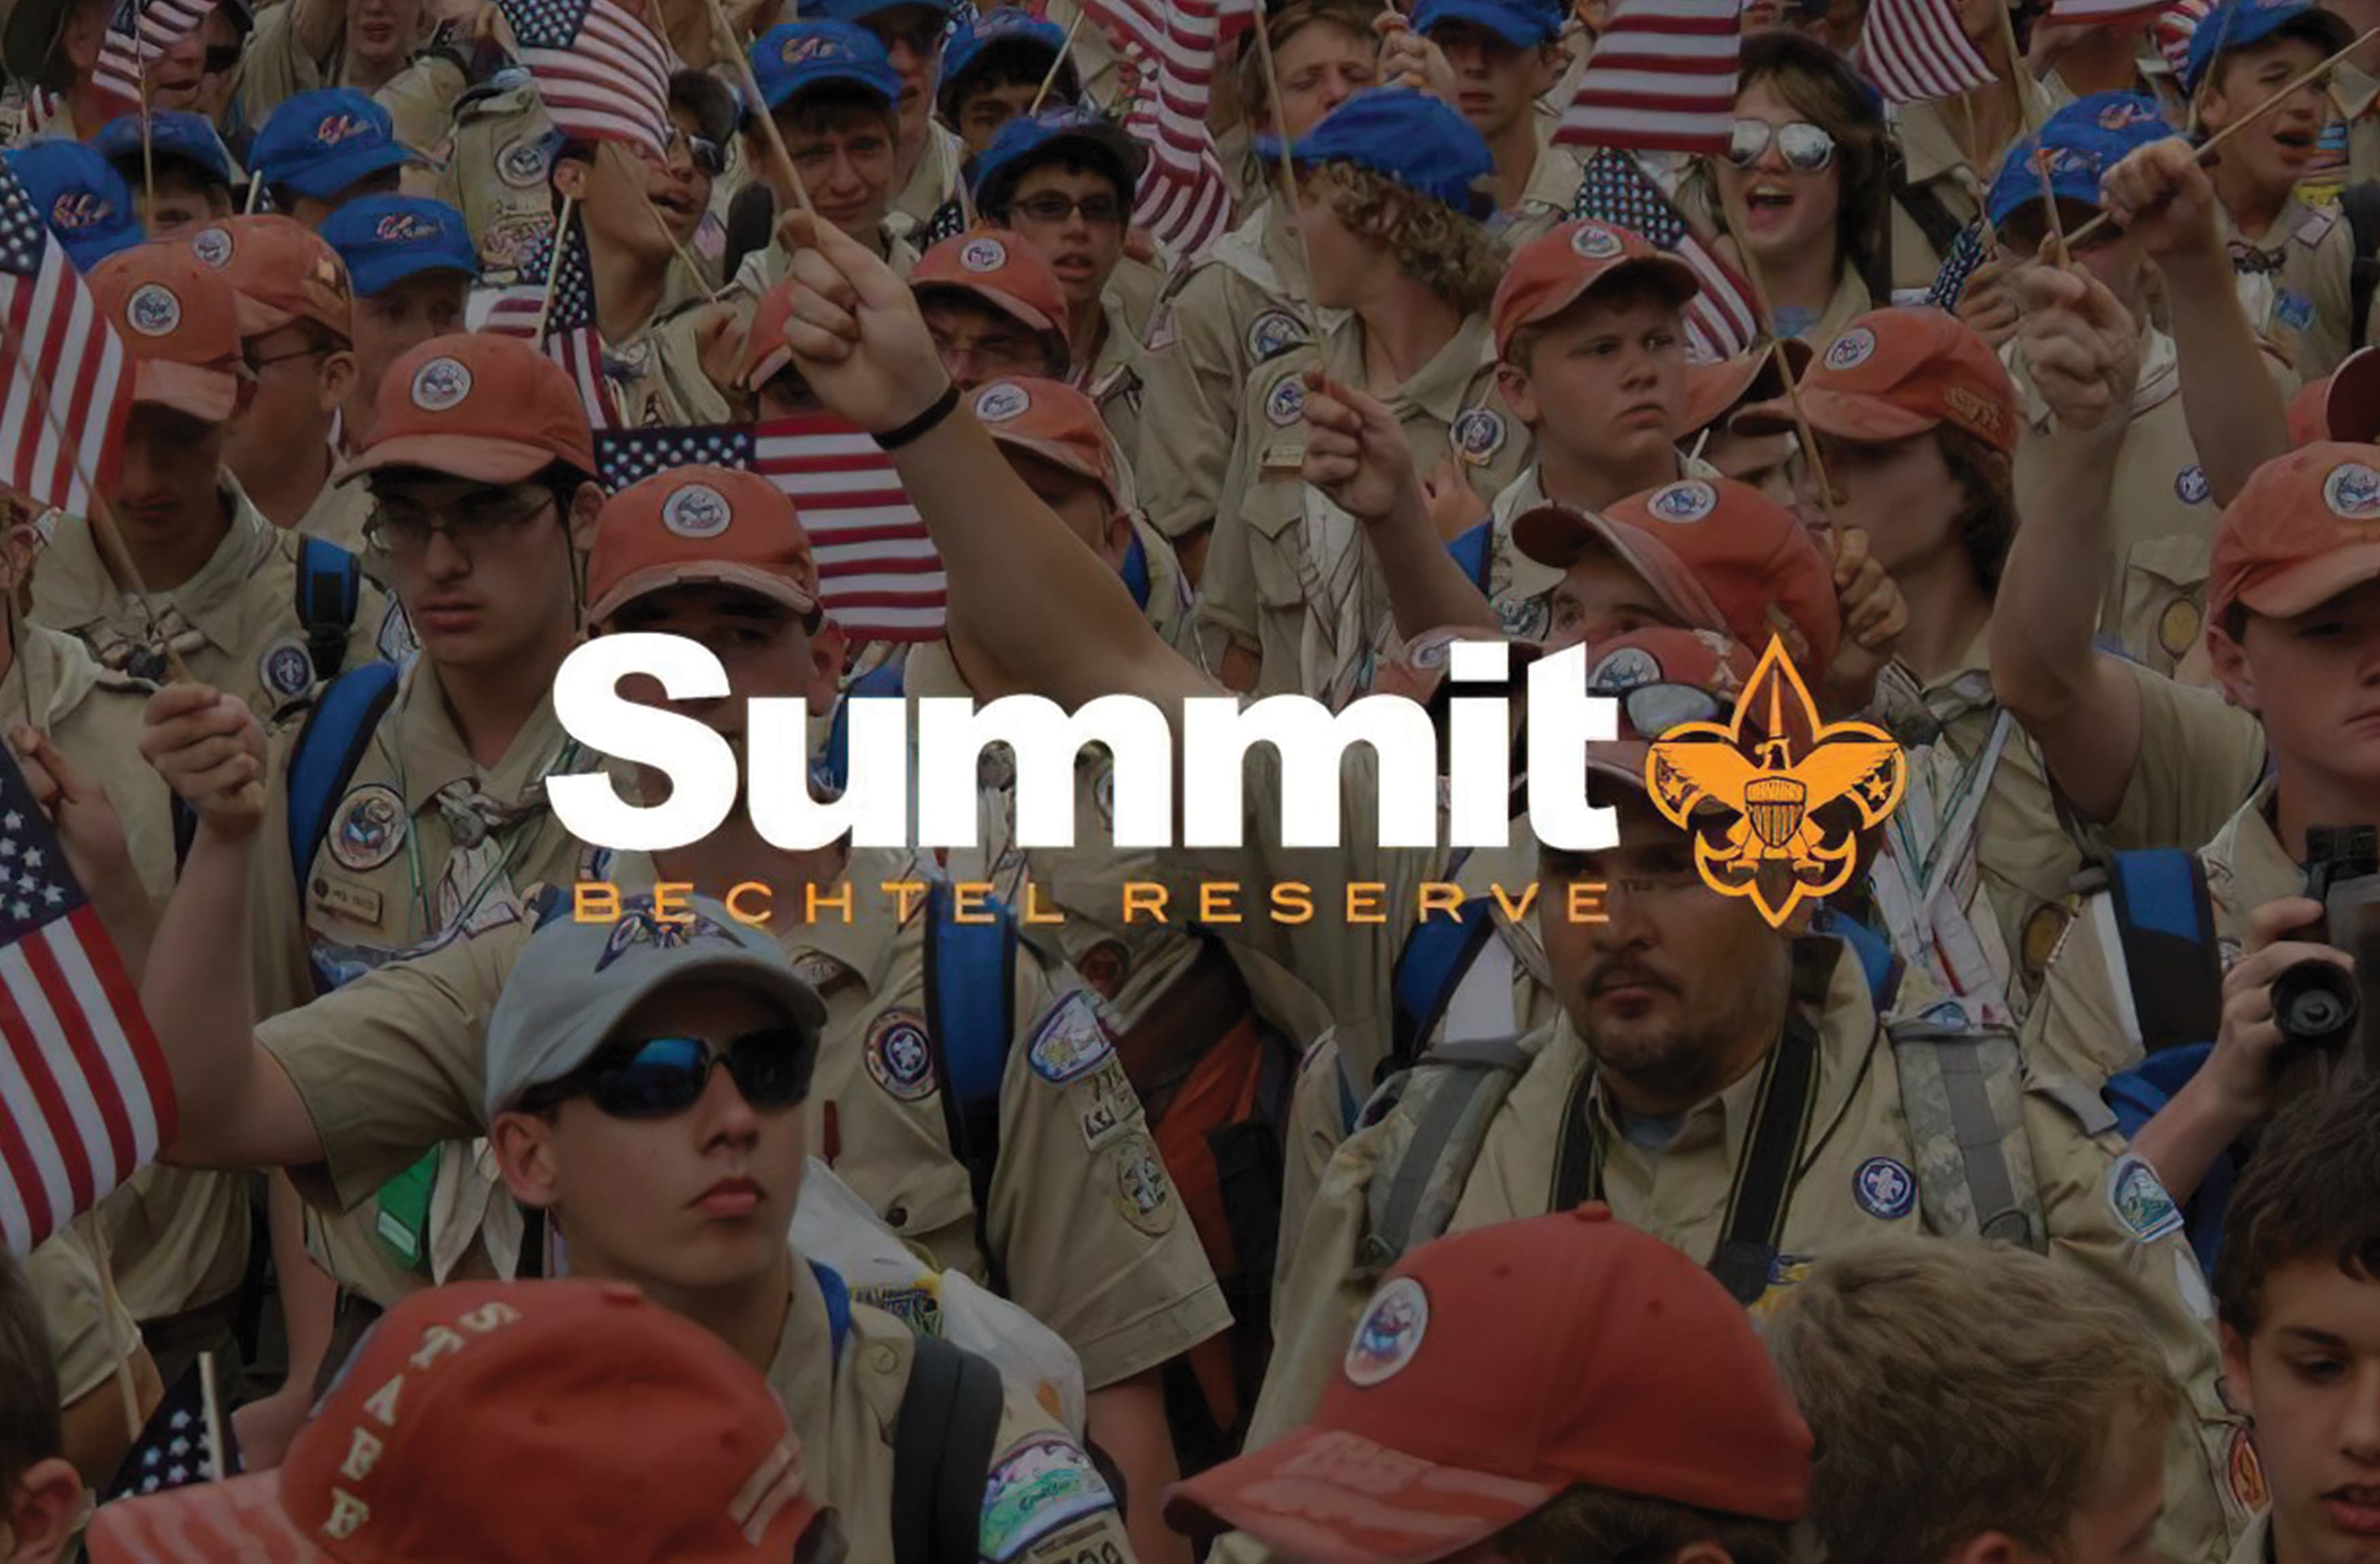 The logo for Summit Bechtel Reserve overlaid on an image of Scouts with American flags.